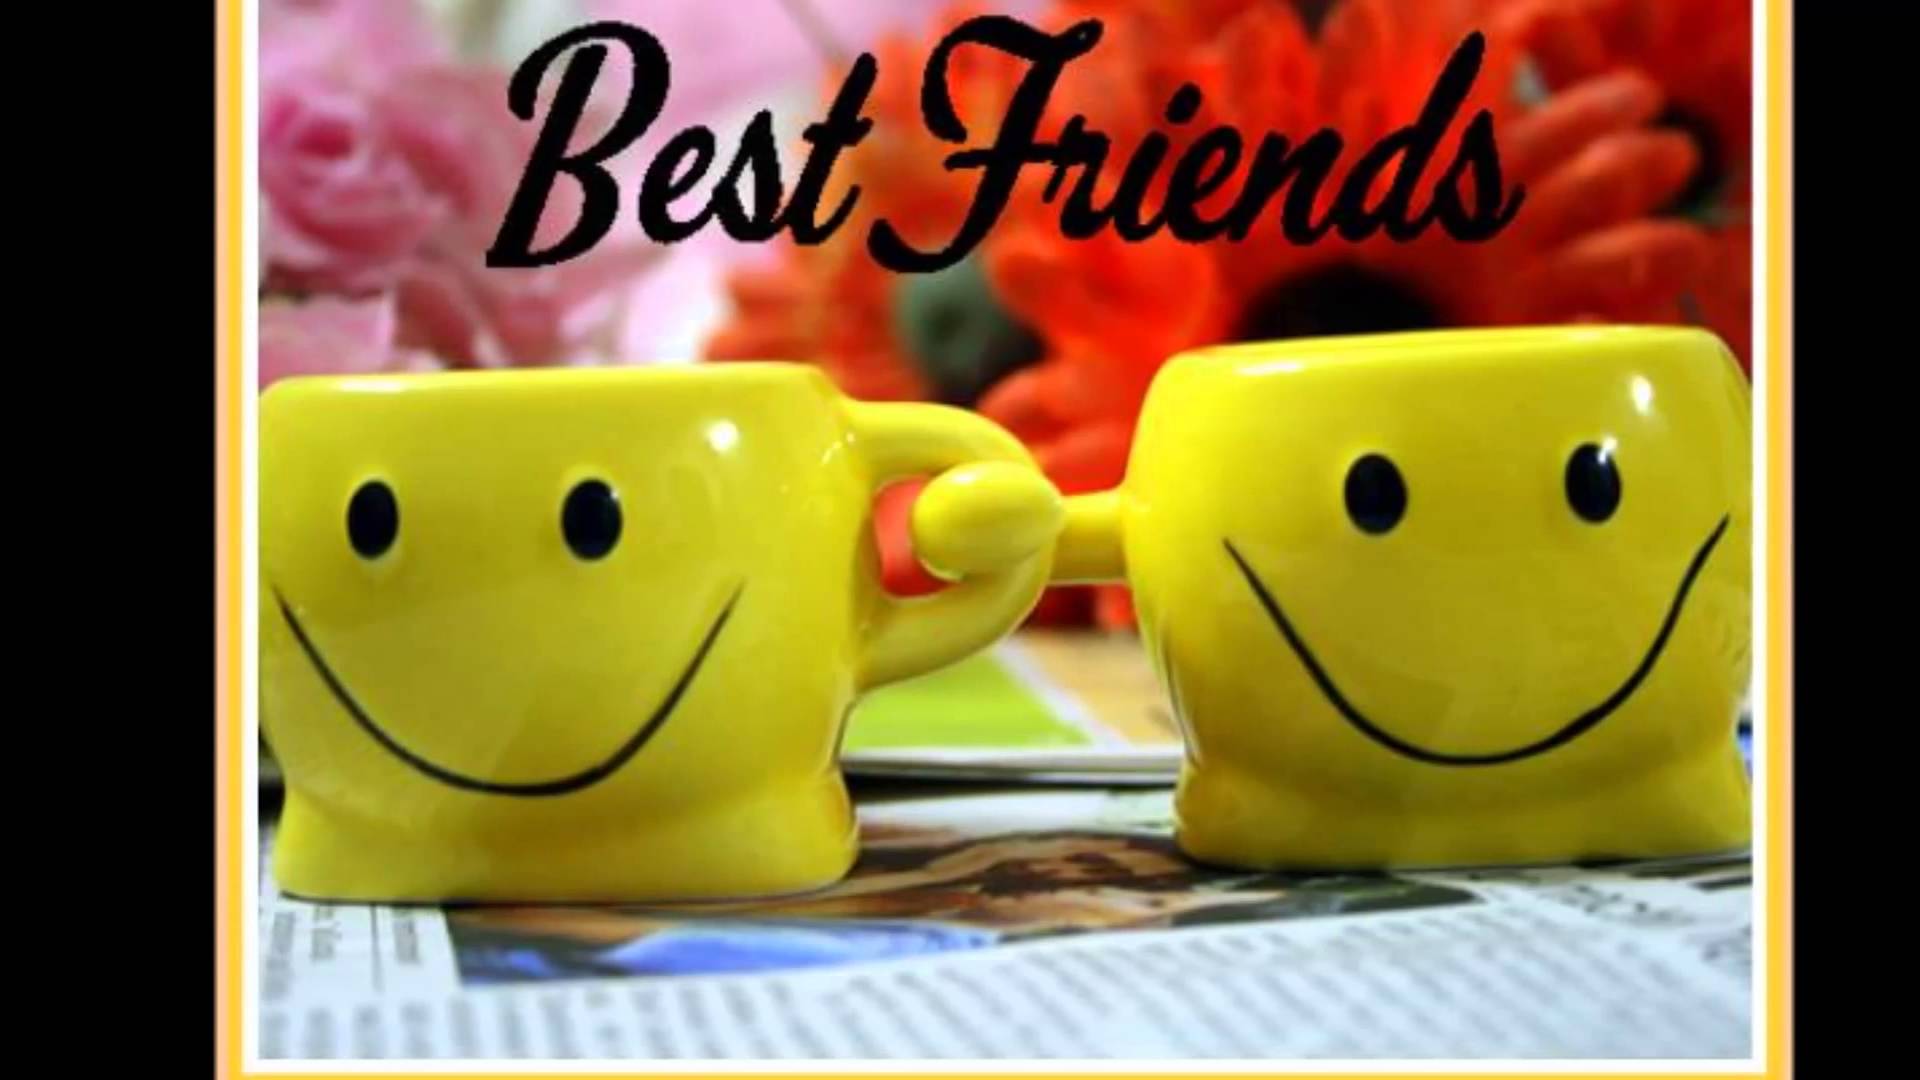 Happy friendship day 2015 Wishes, SMS, Messages, Wallpaper Quotes